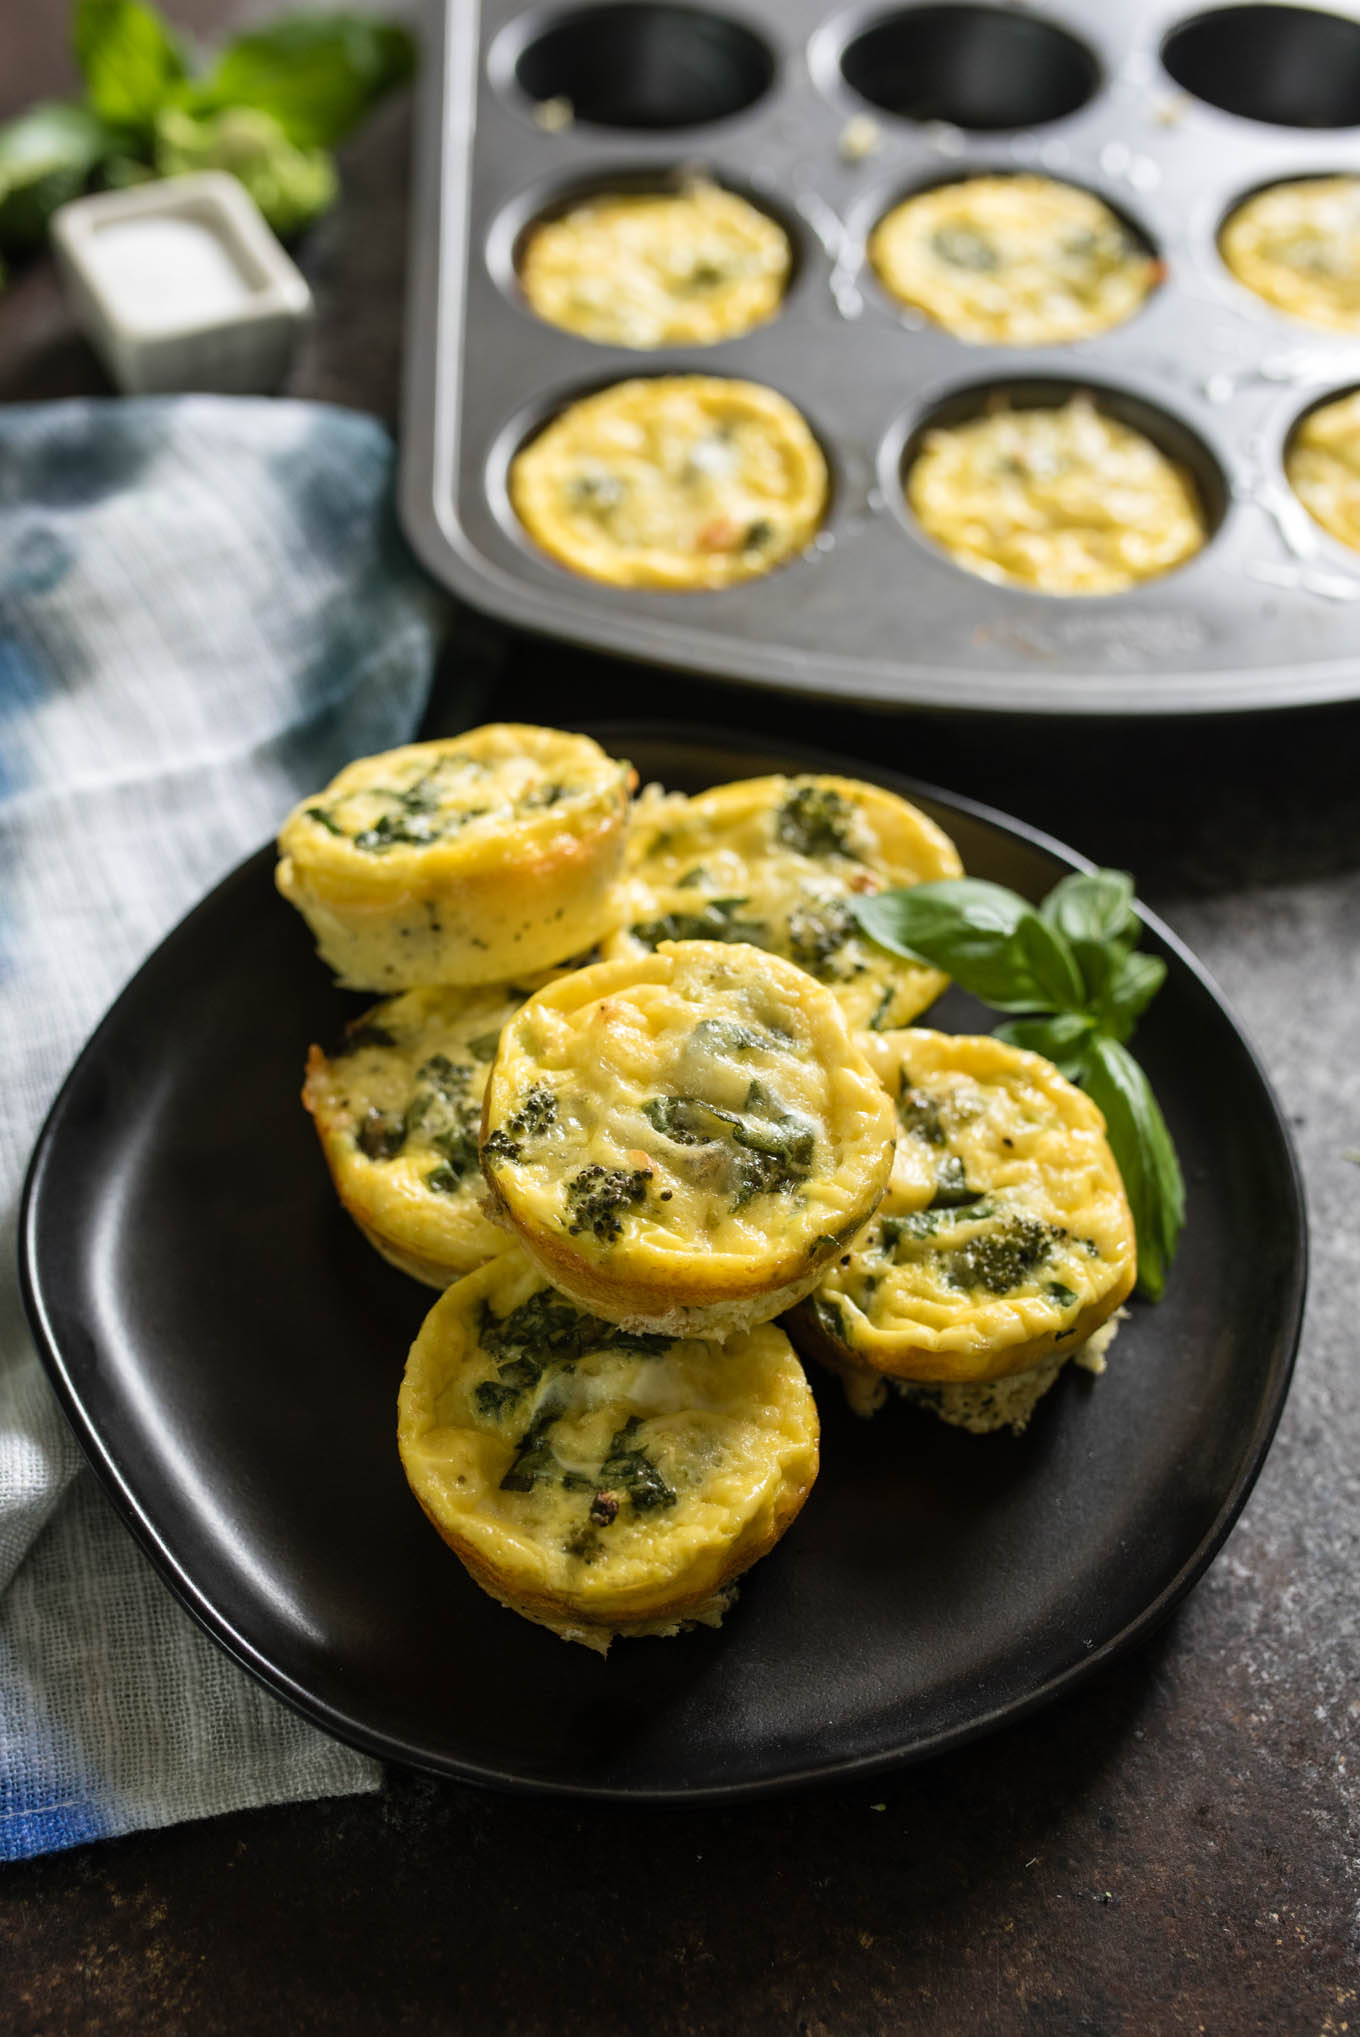 http://www.nutritiouseats.com/wp-content/uploads/2018/06/4-Ingredient-Broccoli-Egg-Muffins-3.jpg